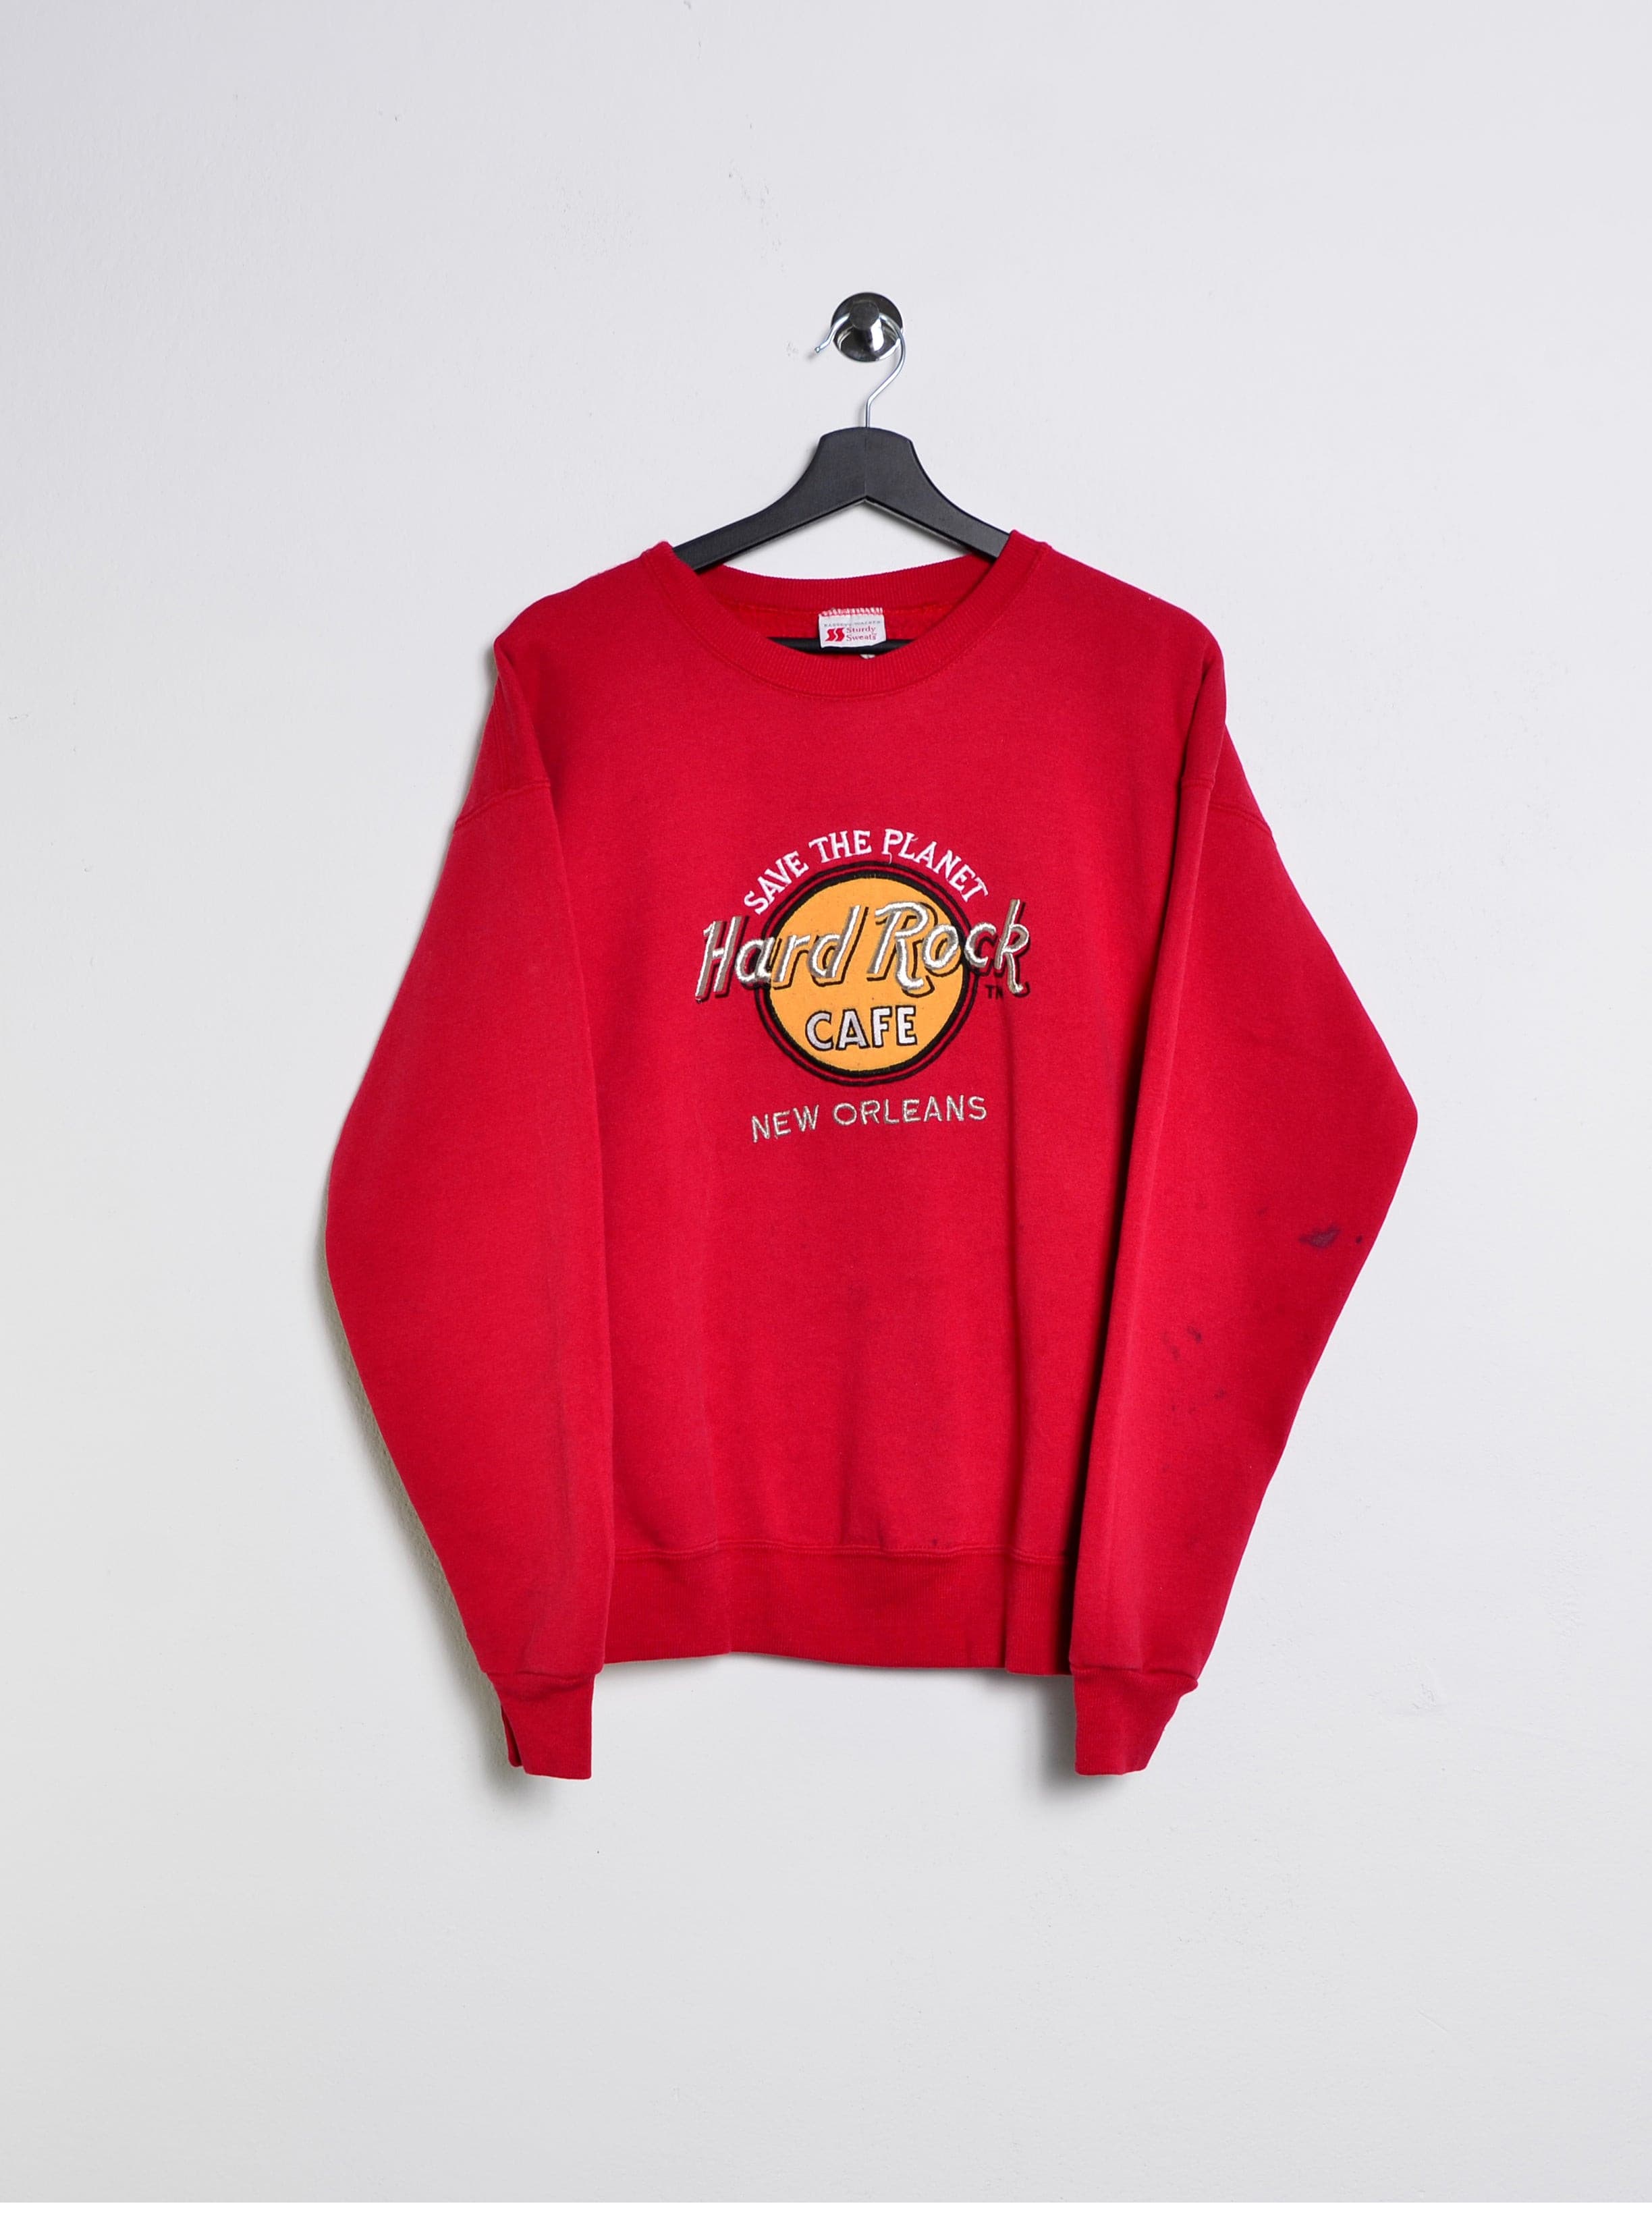 Hard Rock Cafe New Orleans Sweatshirt Red // Small - RHAGHOUSE VINTAGE